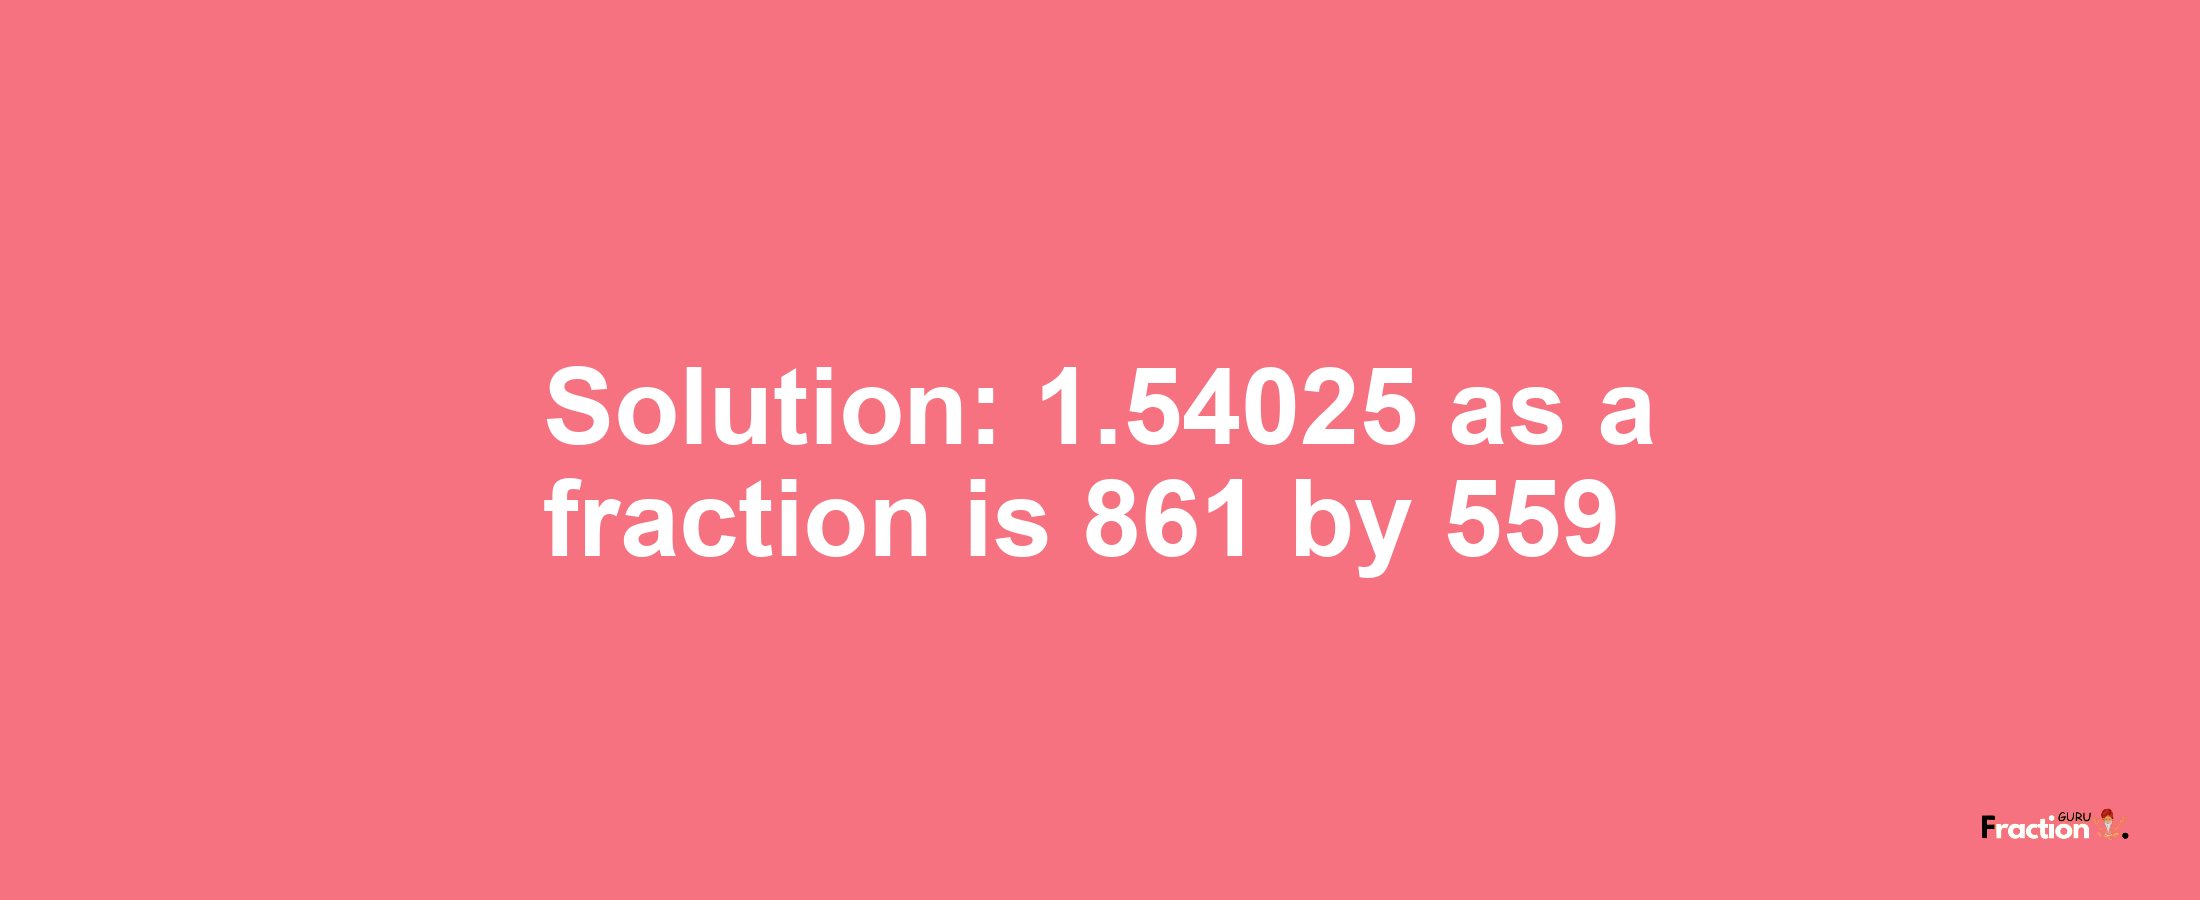 Solution:1.54025 as a fraction is 861/559